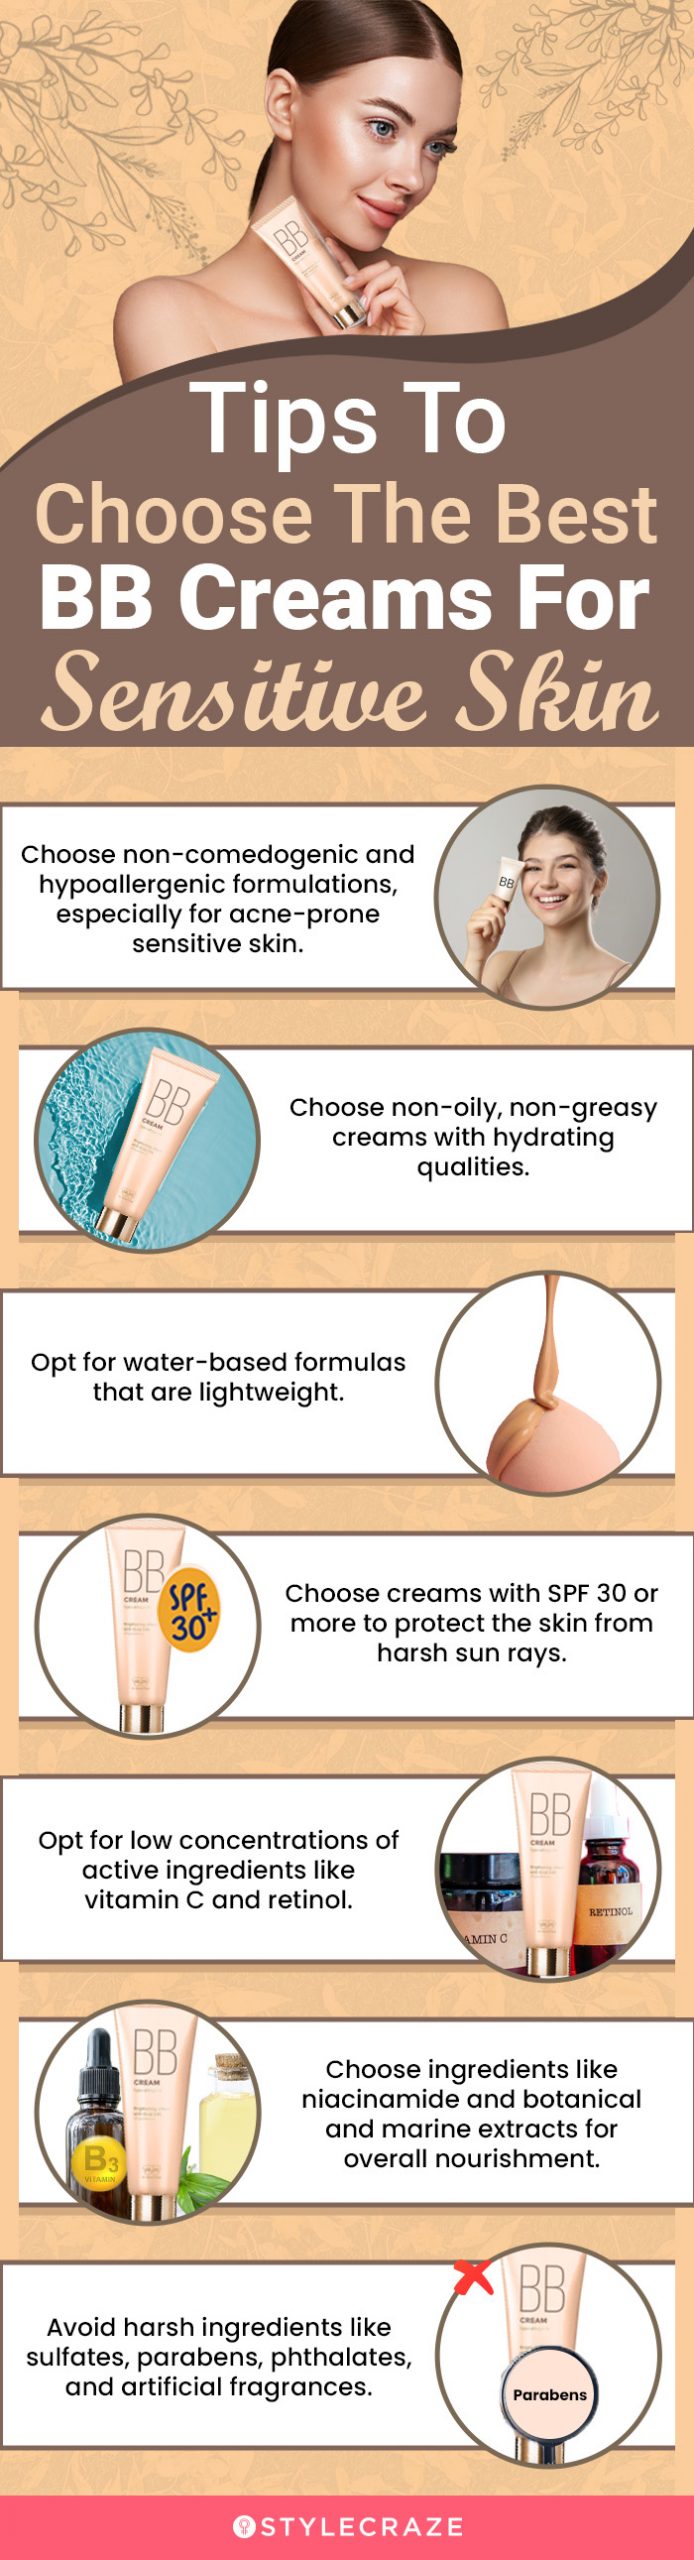 Tips To Choose The Best BB Creams For Sensitive Skin (infographic)